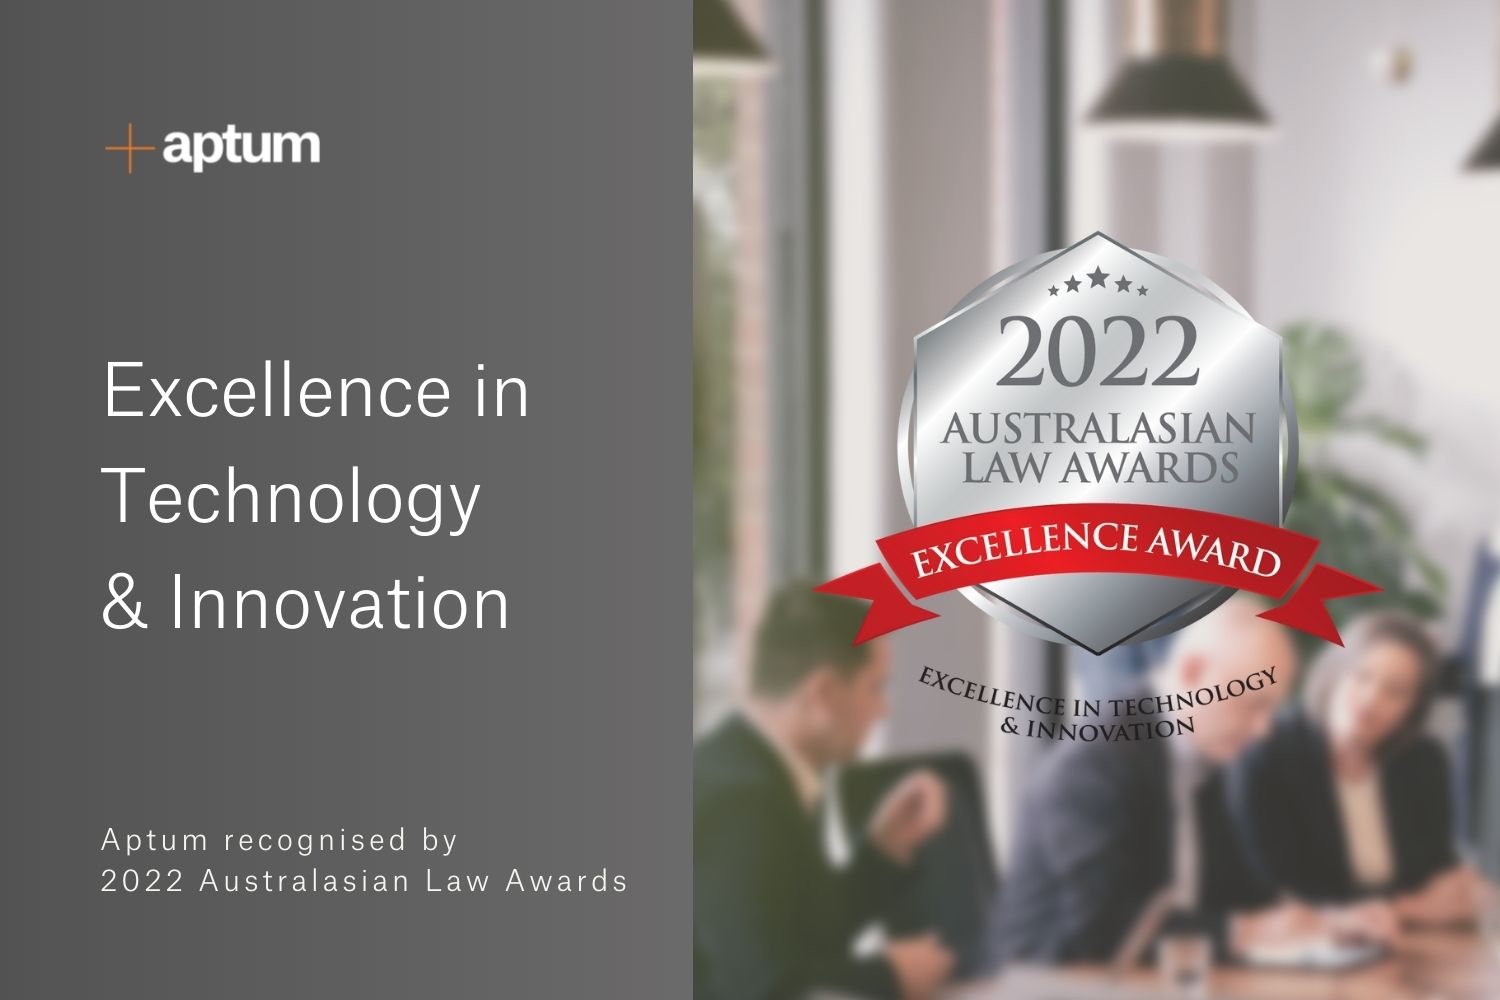 Blurred background of Aptum team on right with silver digital medal in foreground, on the left a dark grey panel with text 'Excellence in Technology & Innovation - Aptum recognised by 2022 Australasian Law Awards'